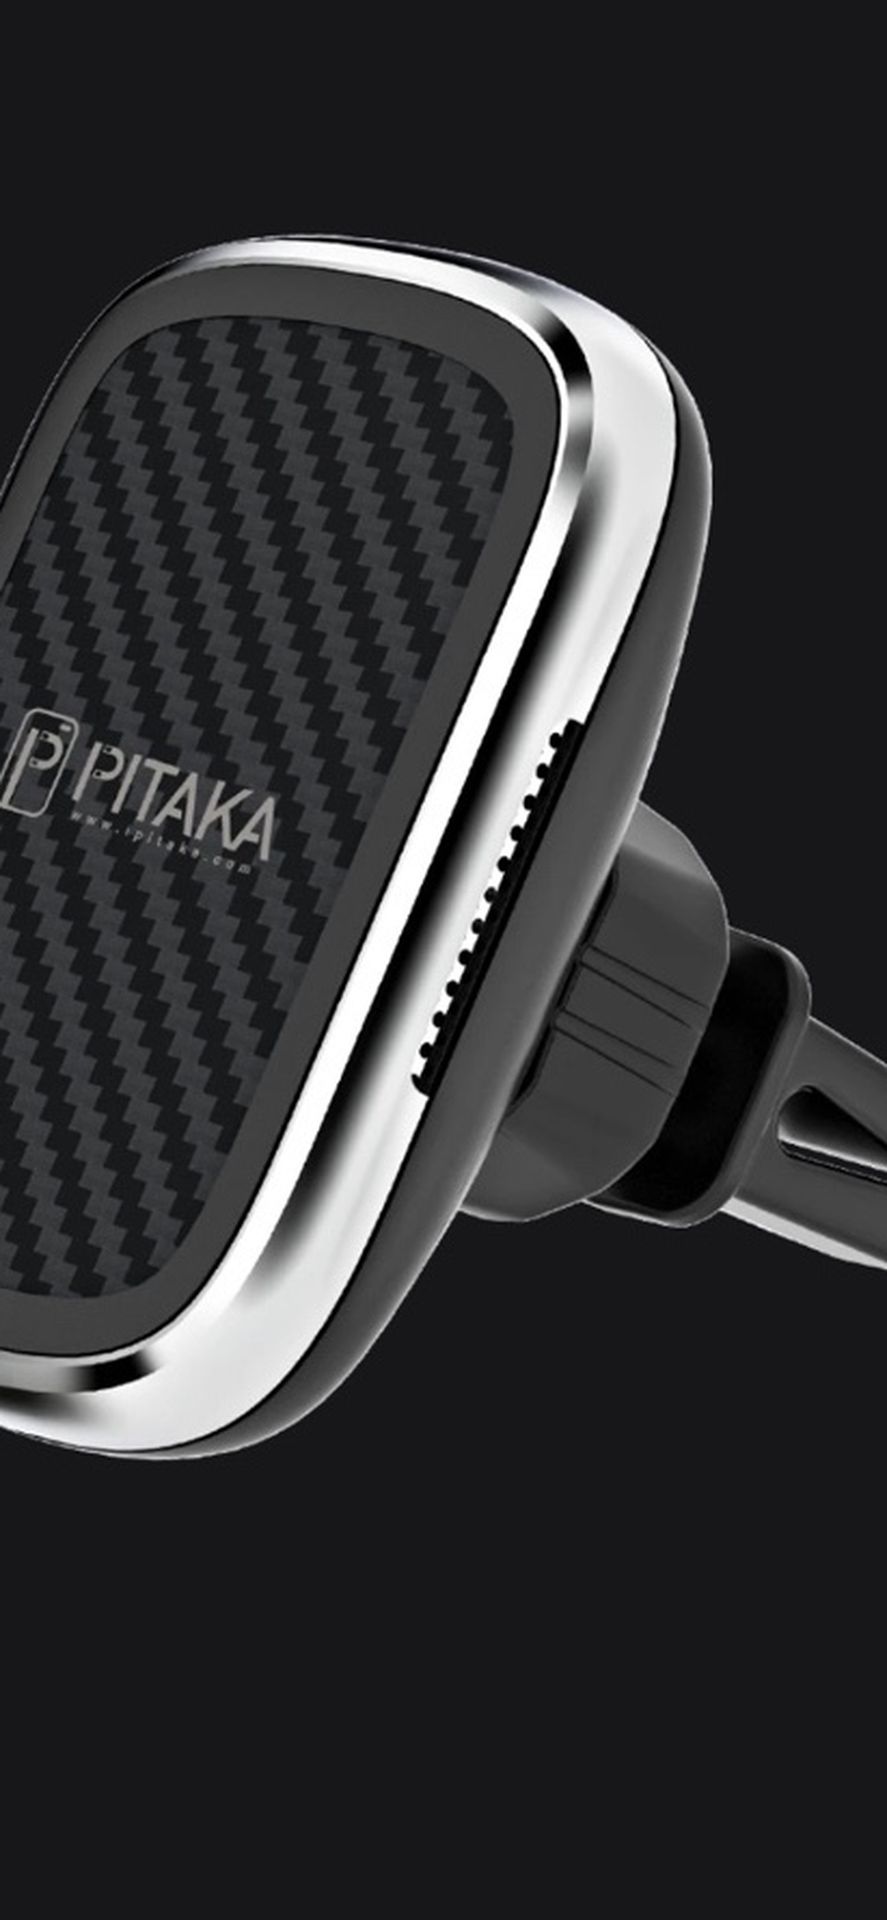 Pitaka Magnetic Wireless Car Charger